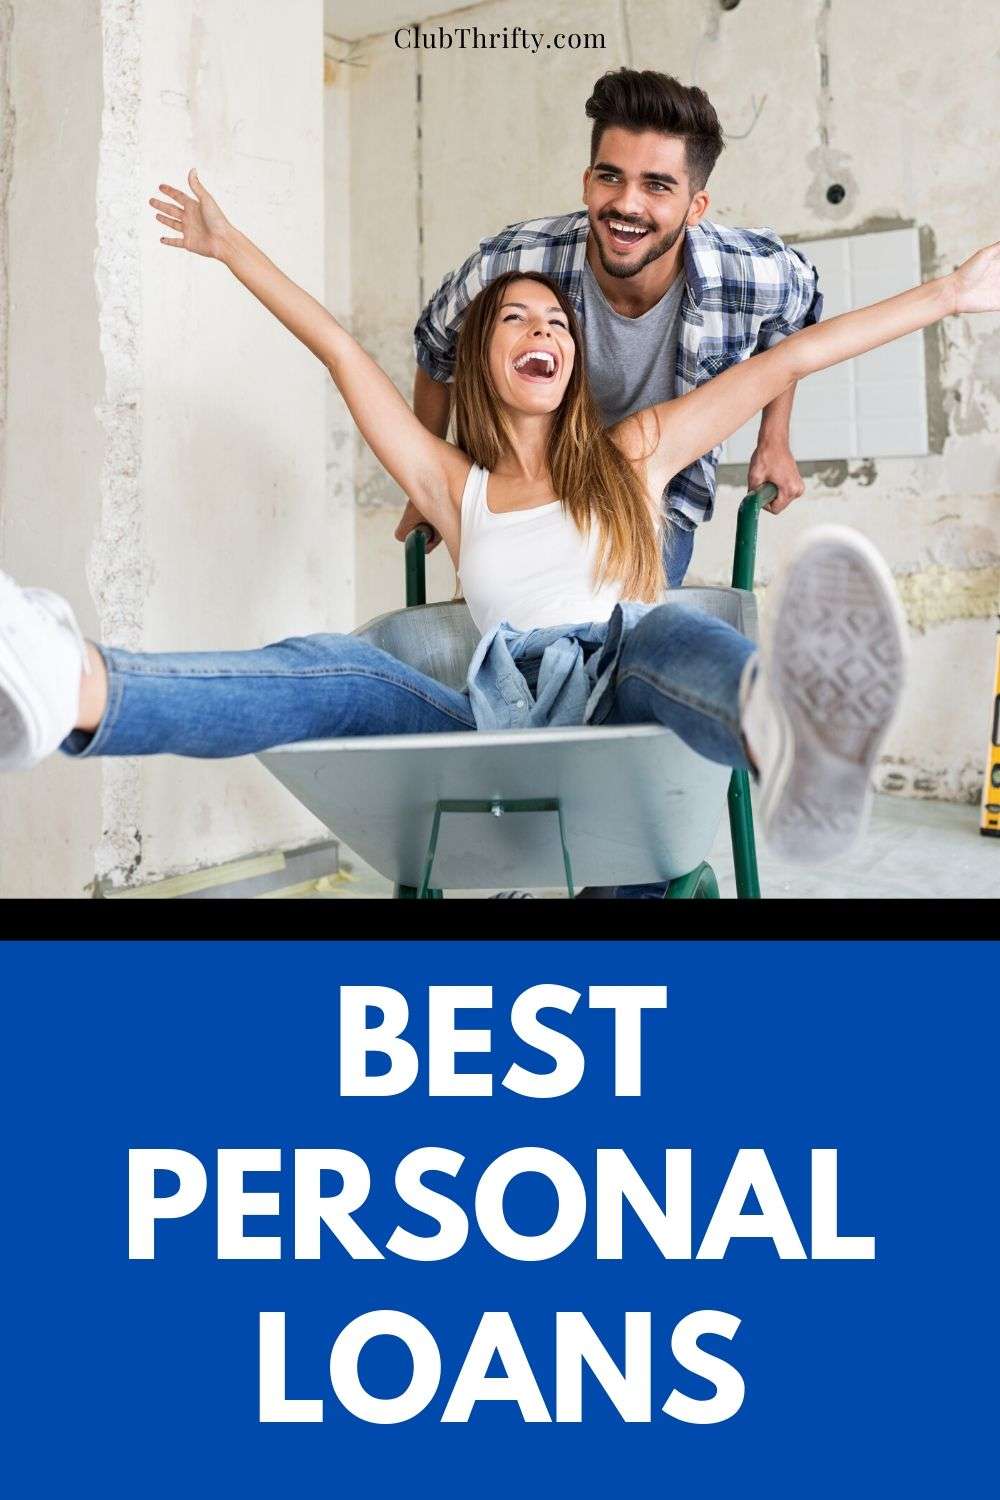 Best Personal Loan Rates and Companies: Compare Top Lenders